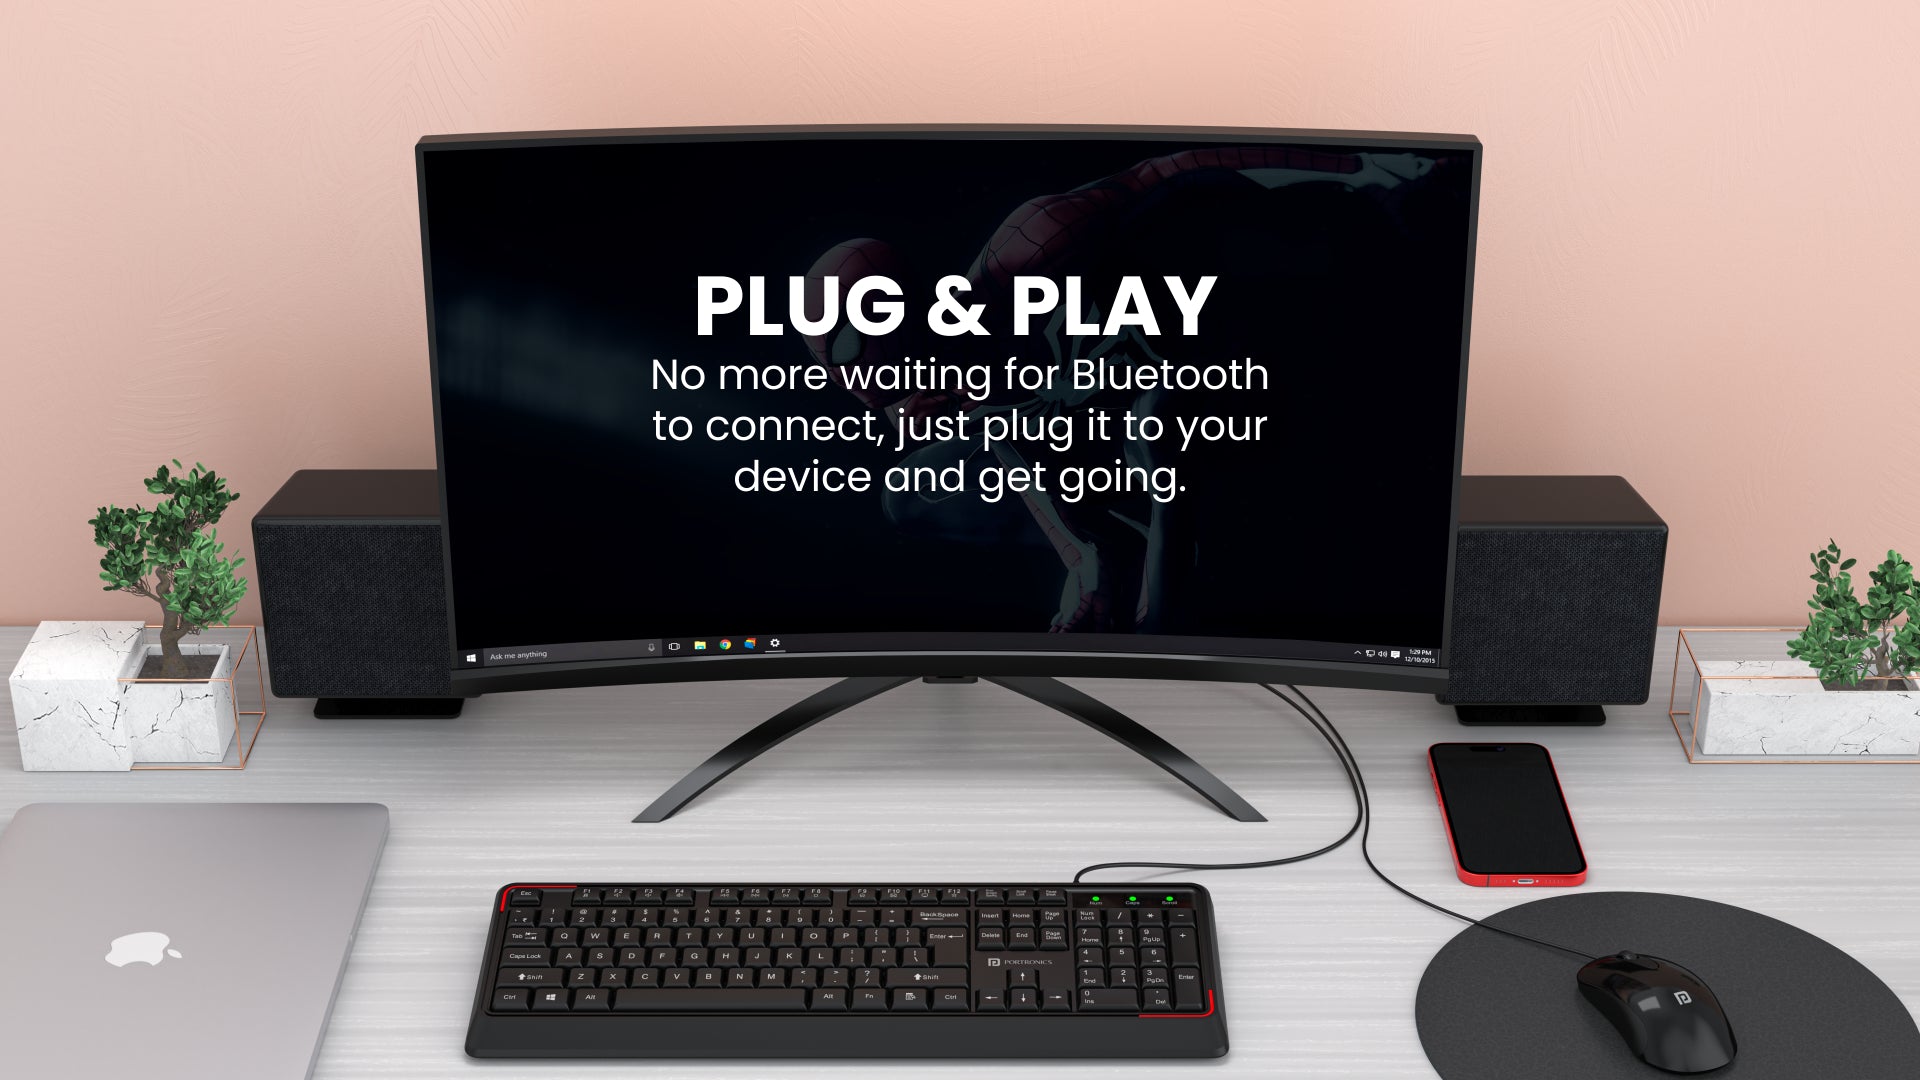 No more waiting for Bluetooth to connect, just plug it to your device and get going with Portronics Ki-Pad wired gaming keyboard